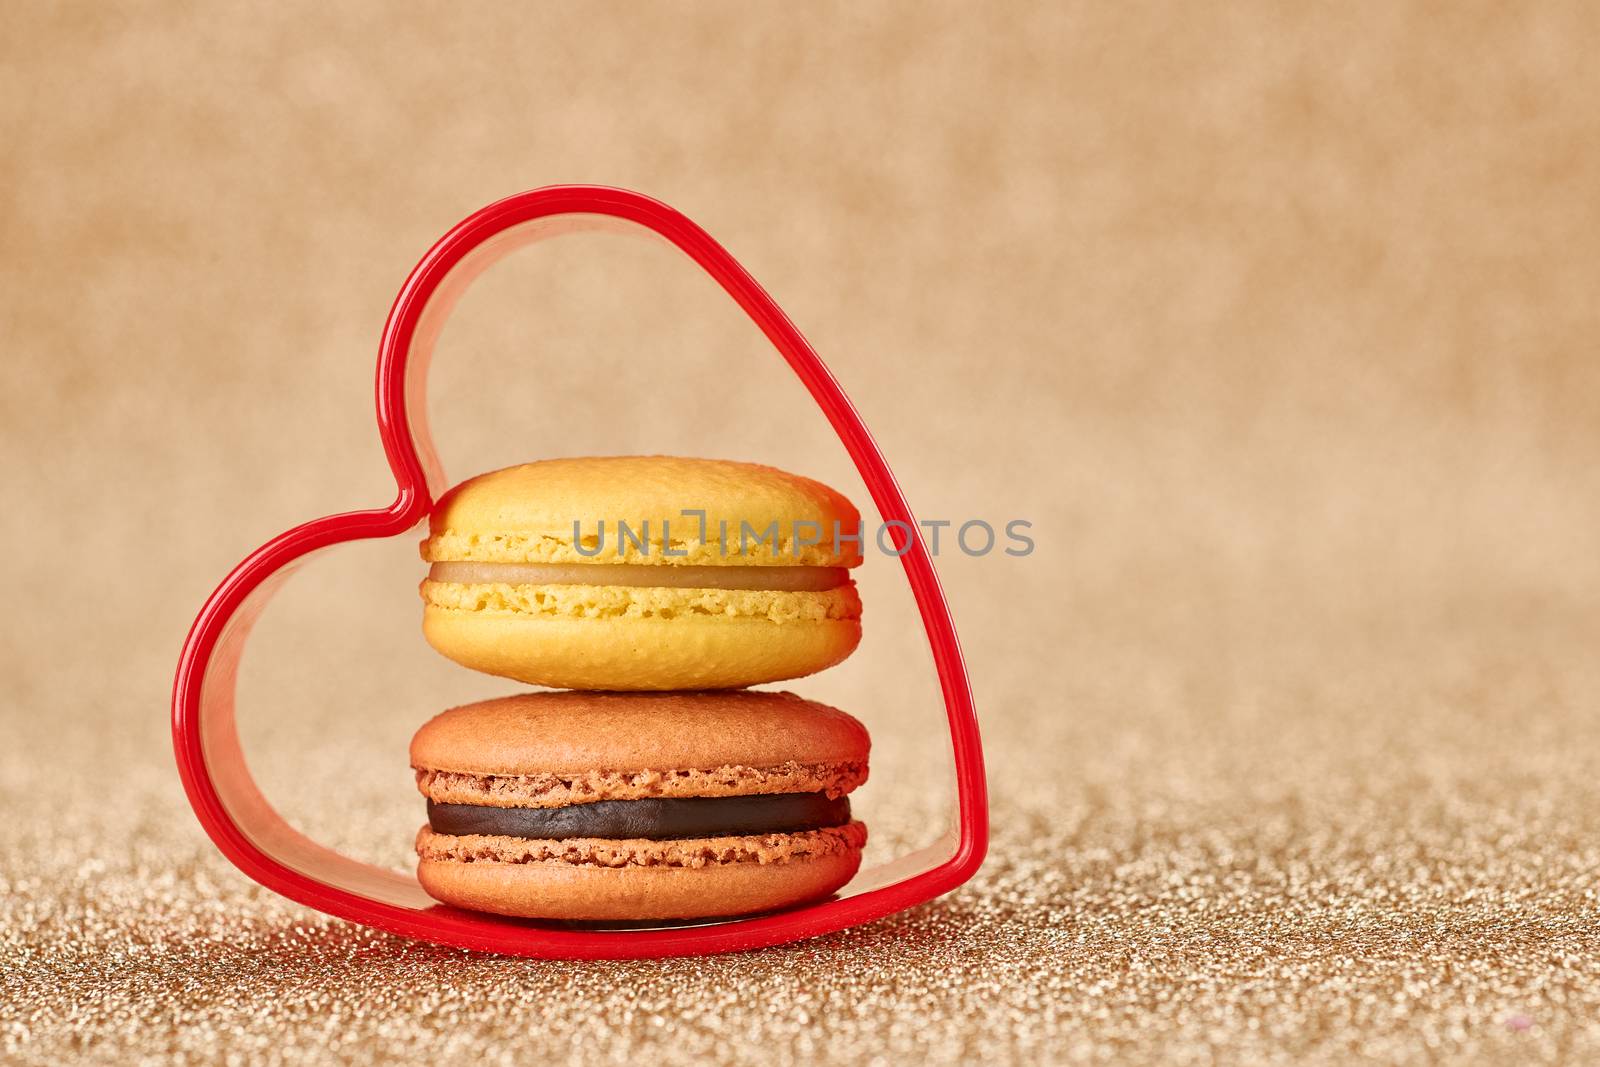 Valentines Day. Love. Red heart, Macaron french sweet delicious dessert yellow, chocolate. Vintage retro romantic style. Unusual creative art greeting card, gold background, copyspace